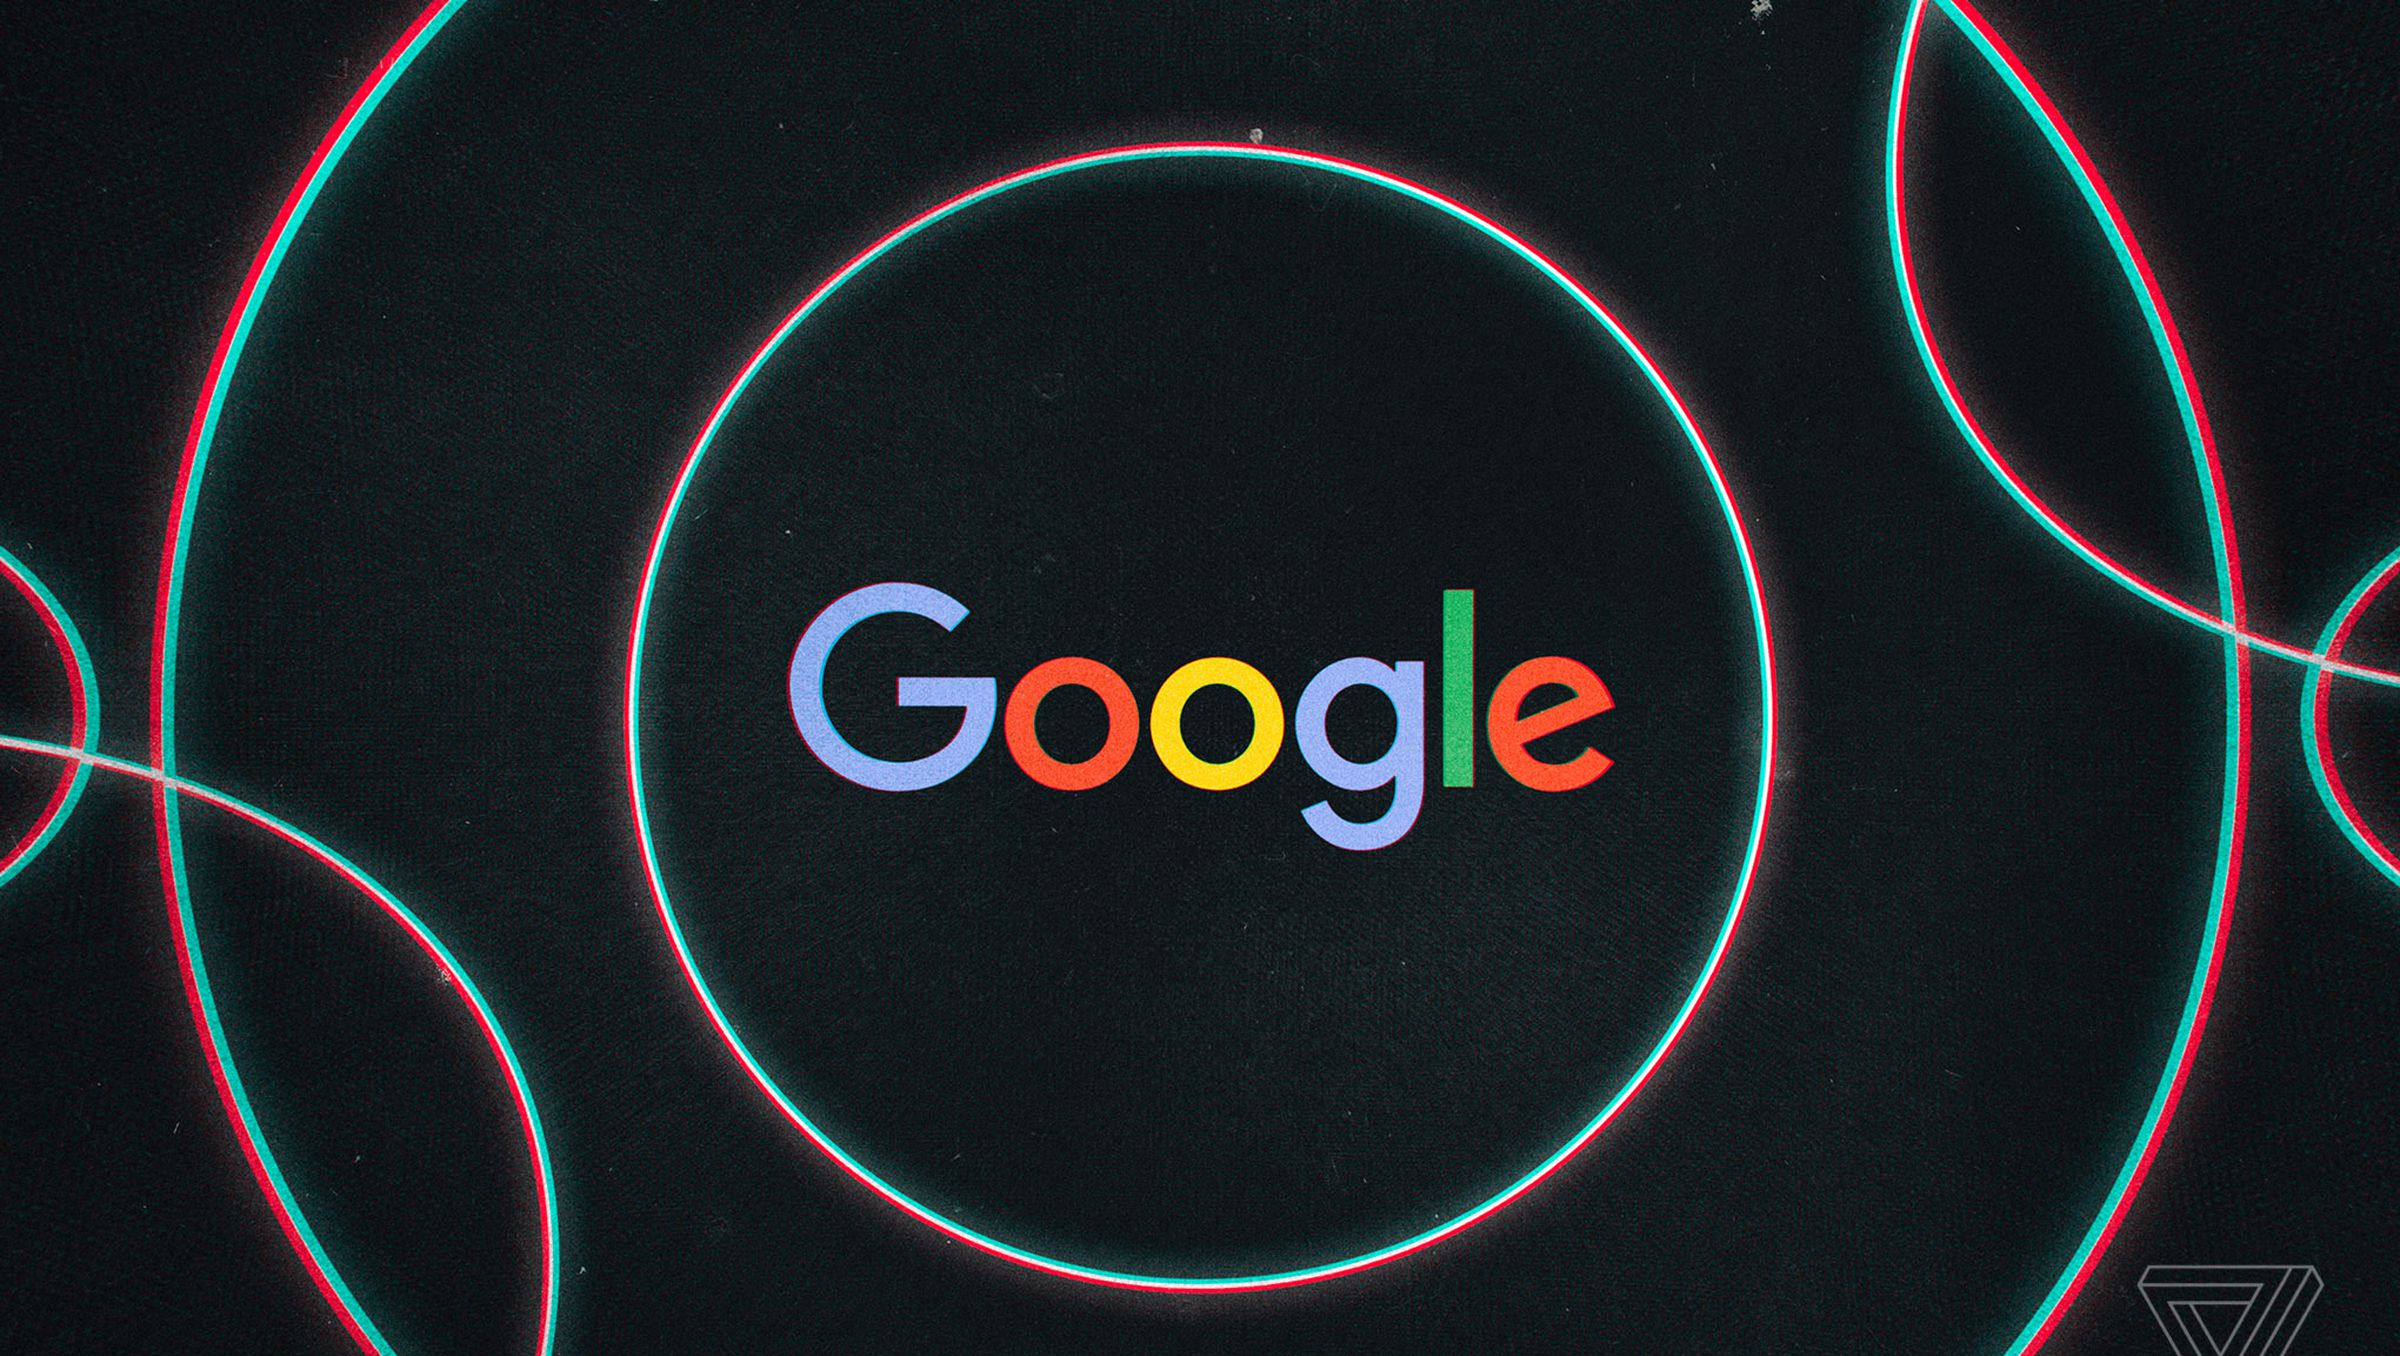 A Google logo sits at the center of ominous concentric circles